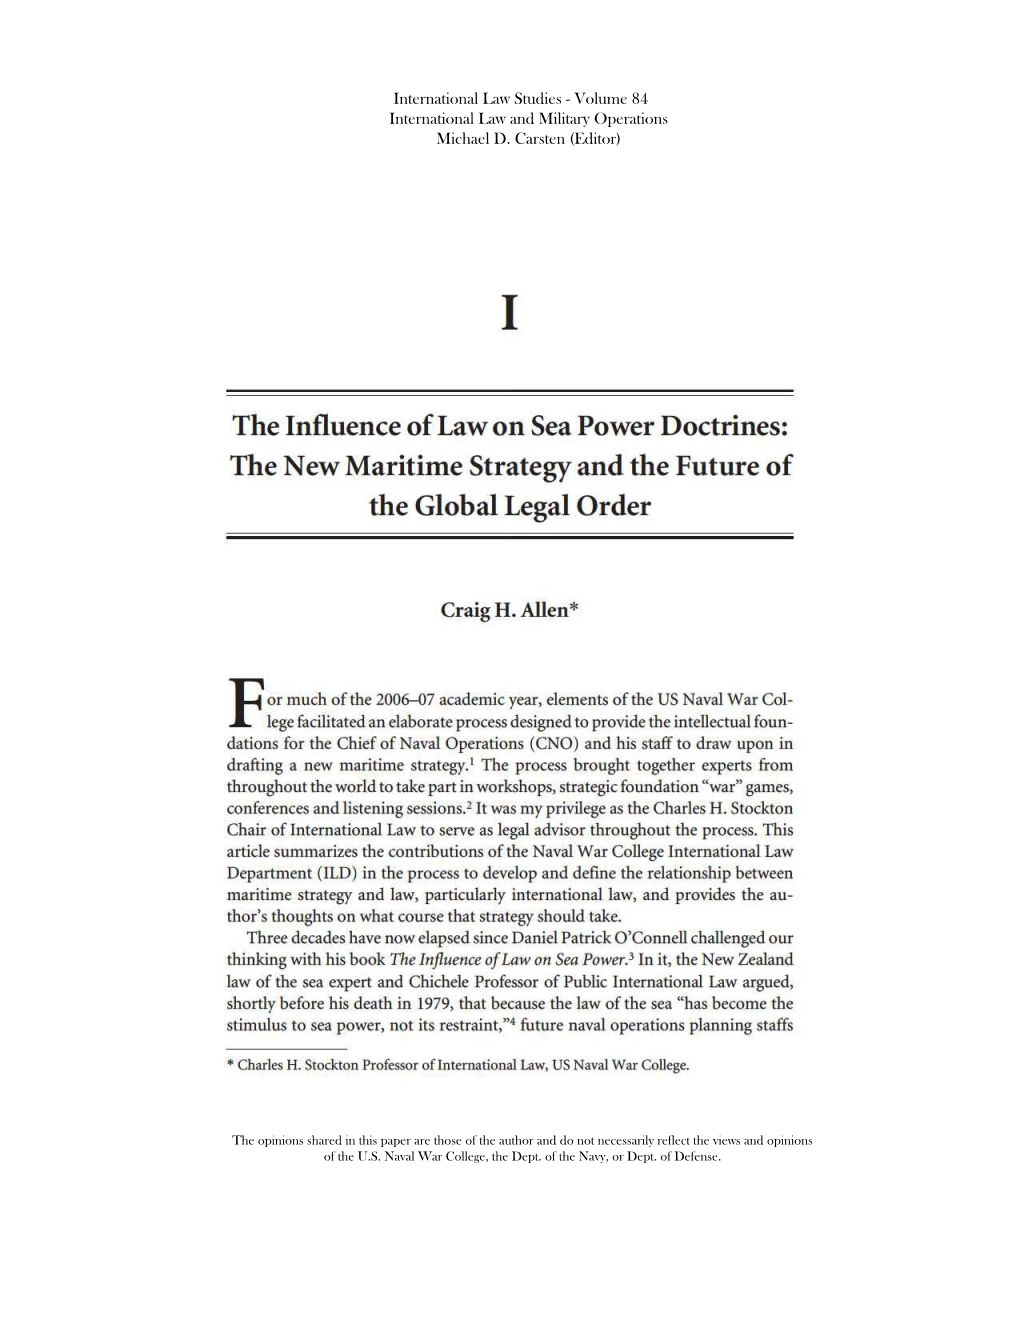 The Influence of Law on Sea Power Doctrines: the New Maritime Strategy and the Future of the Global Legal Order